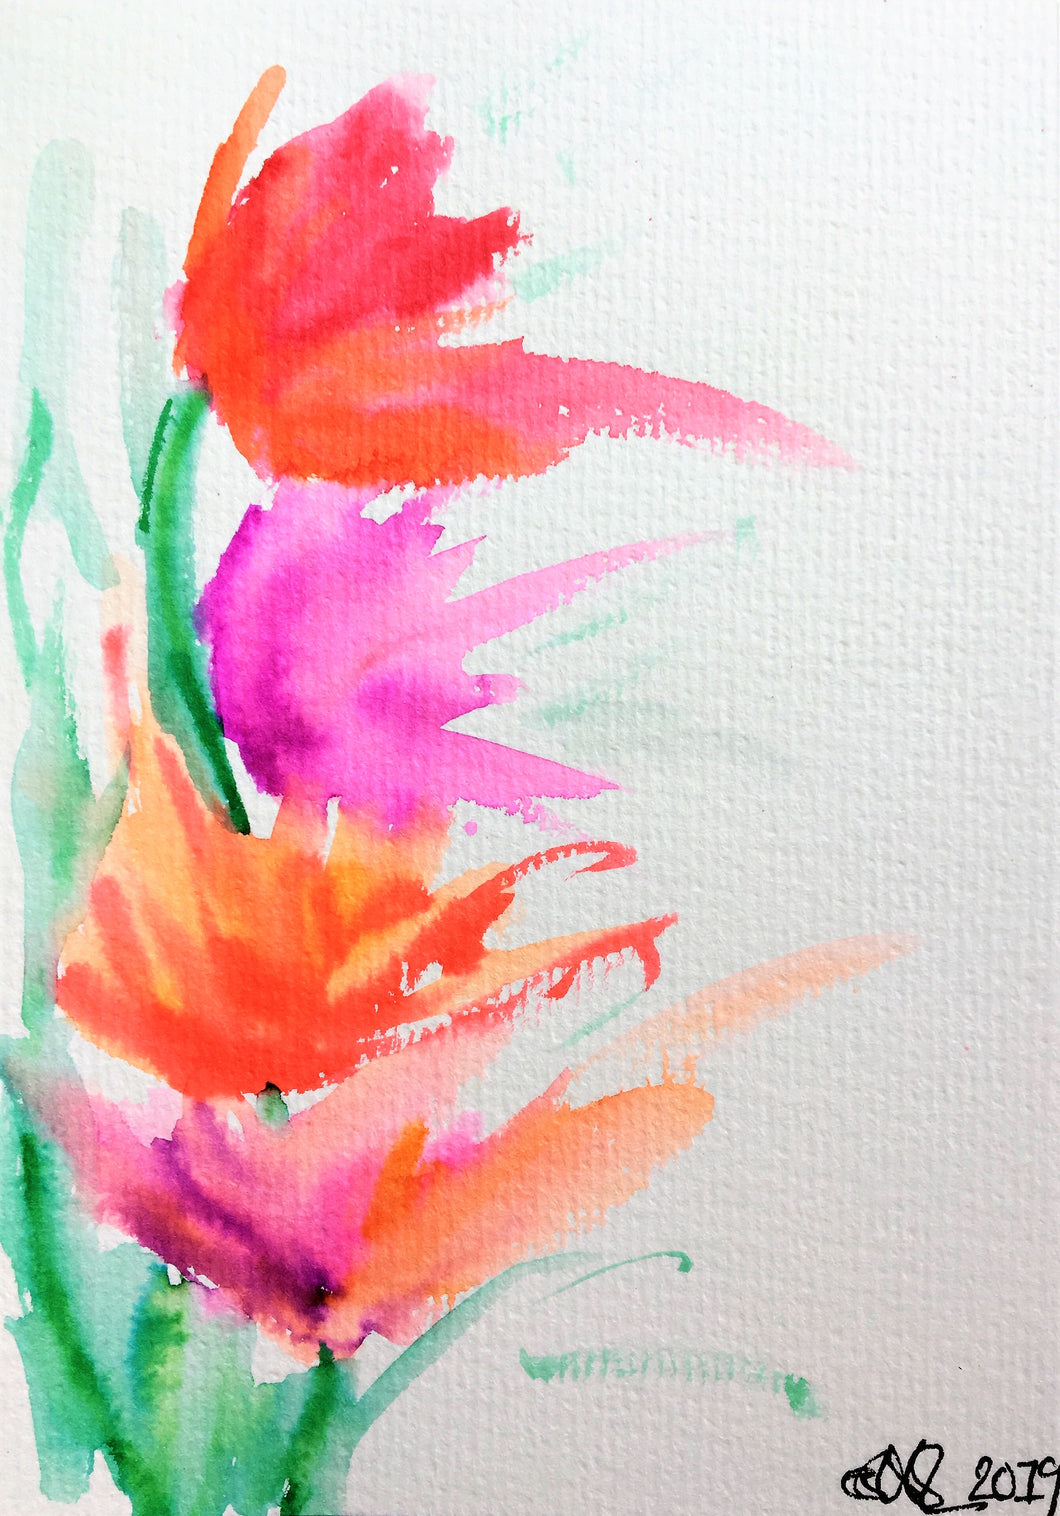 Hand-painted Greeting Card - Abstract Pink, Orange and Purple Tulip Design - eDgE dEsiGn London